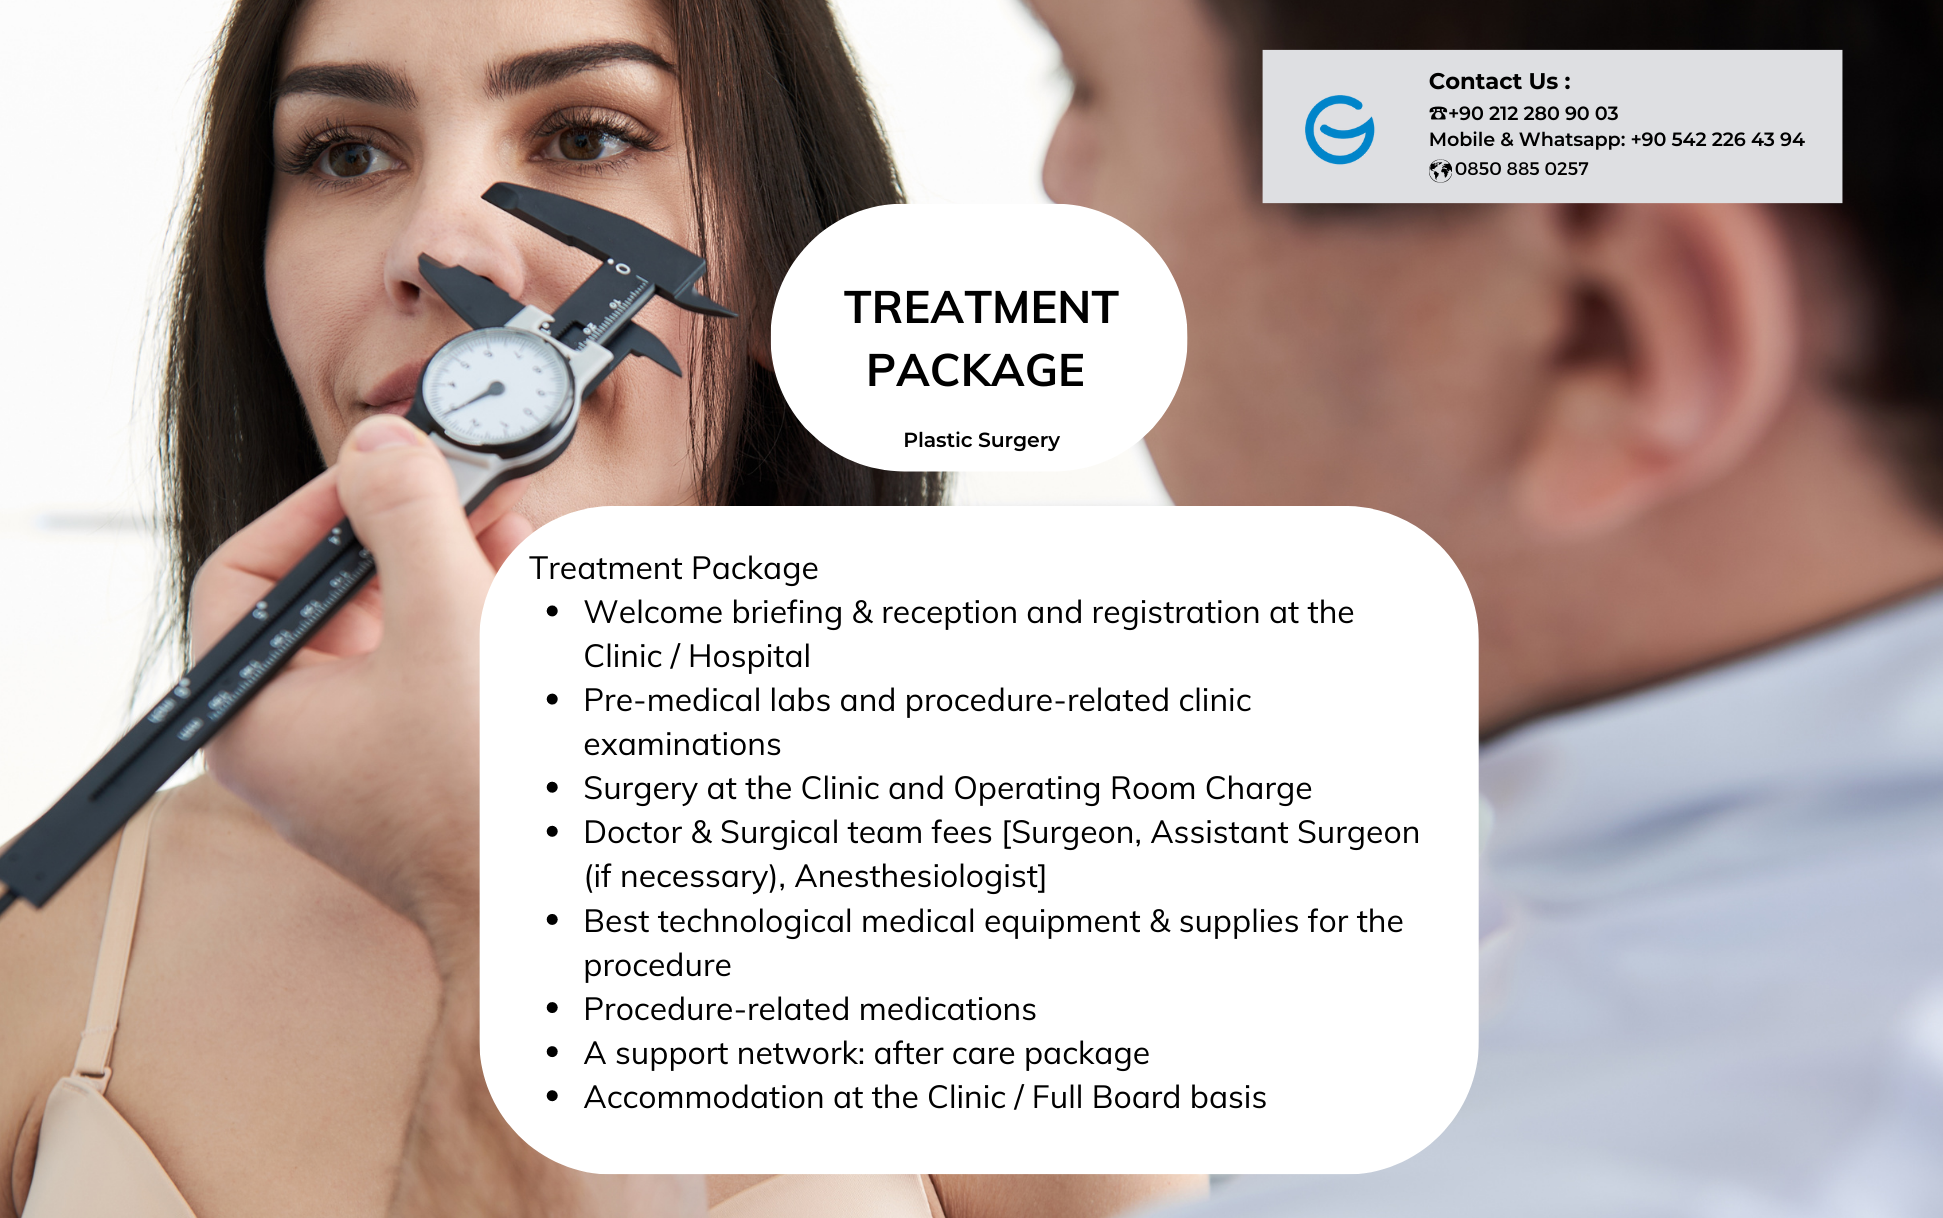 Plastic Surgery Treatment Package